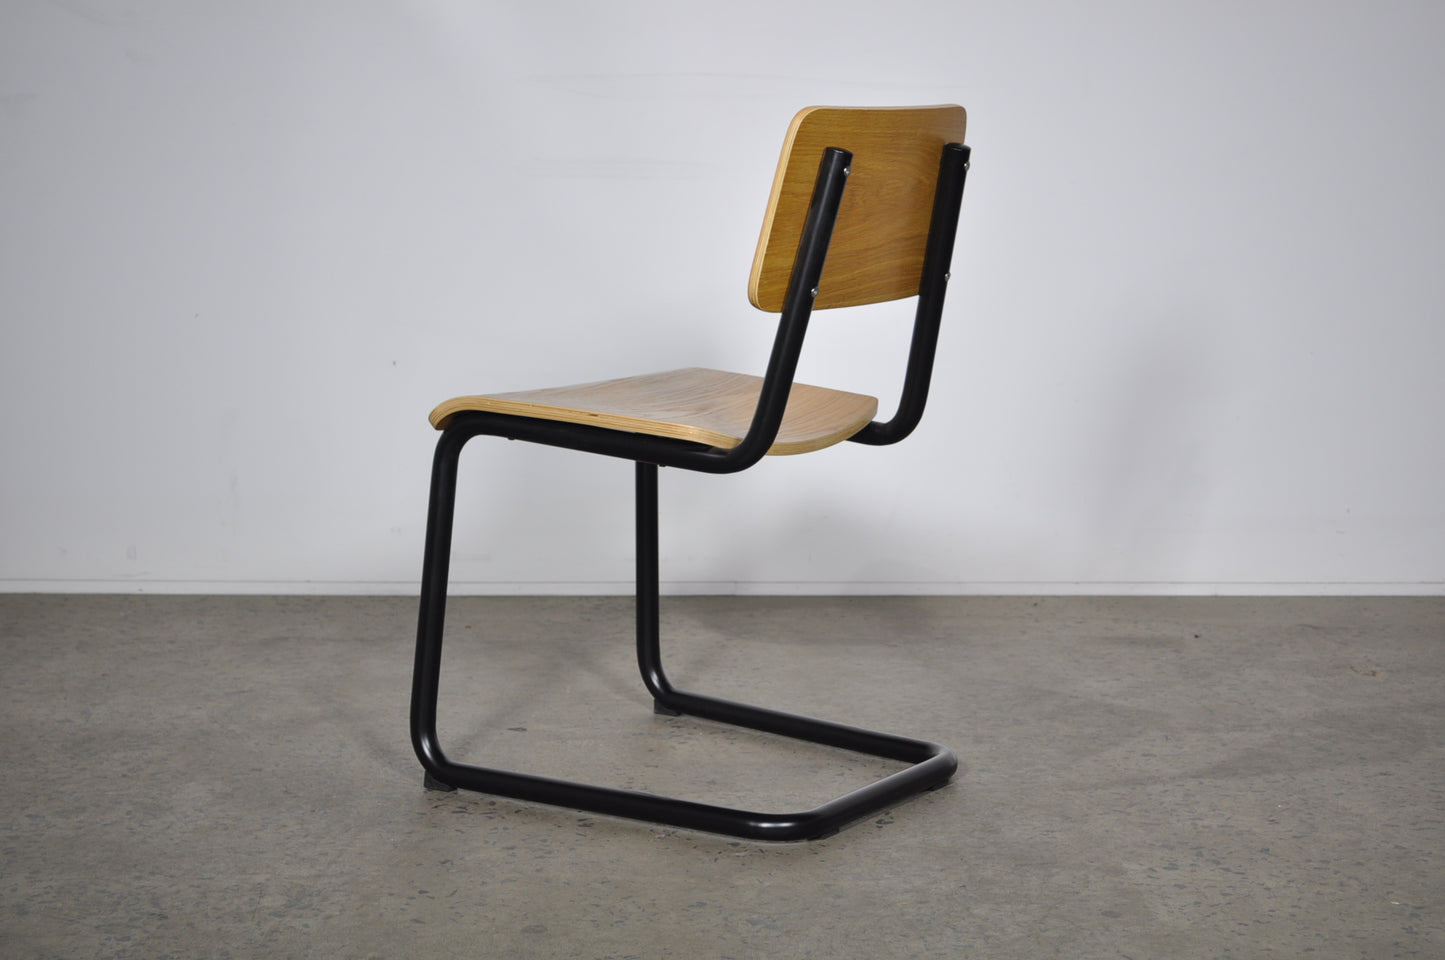 Cantilever side chair by Sean Dix. Set of 4.